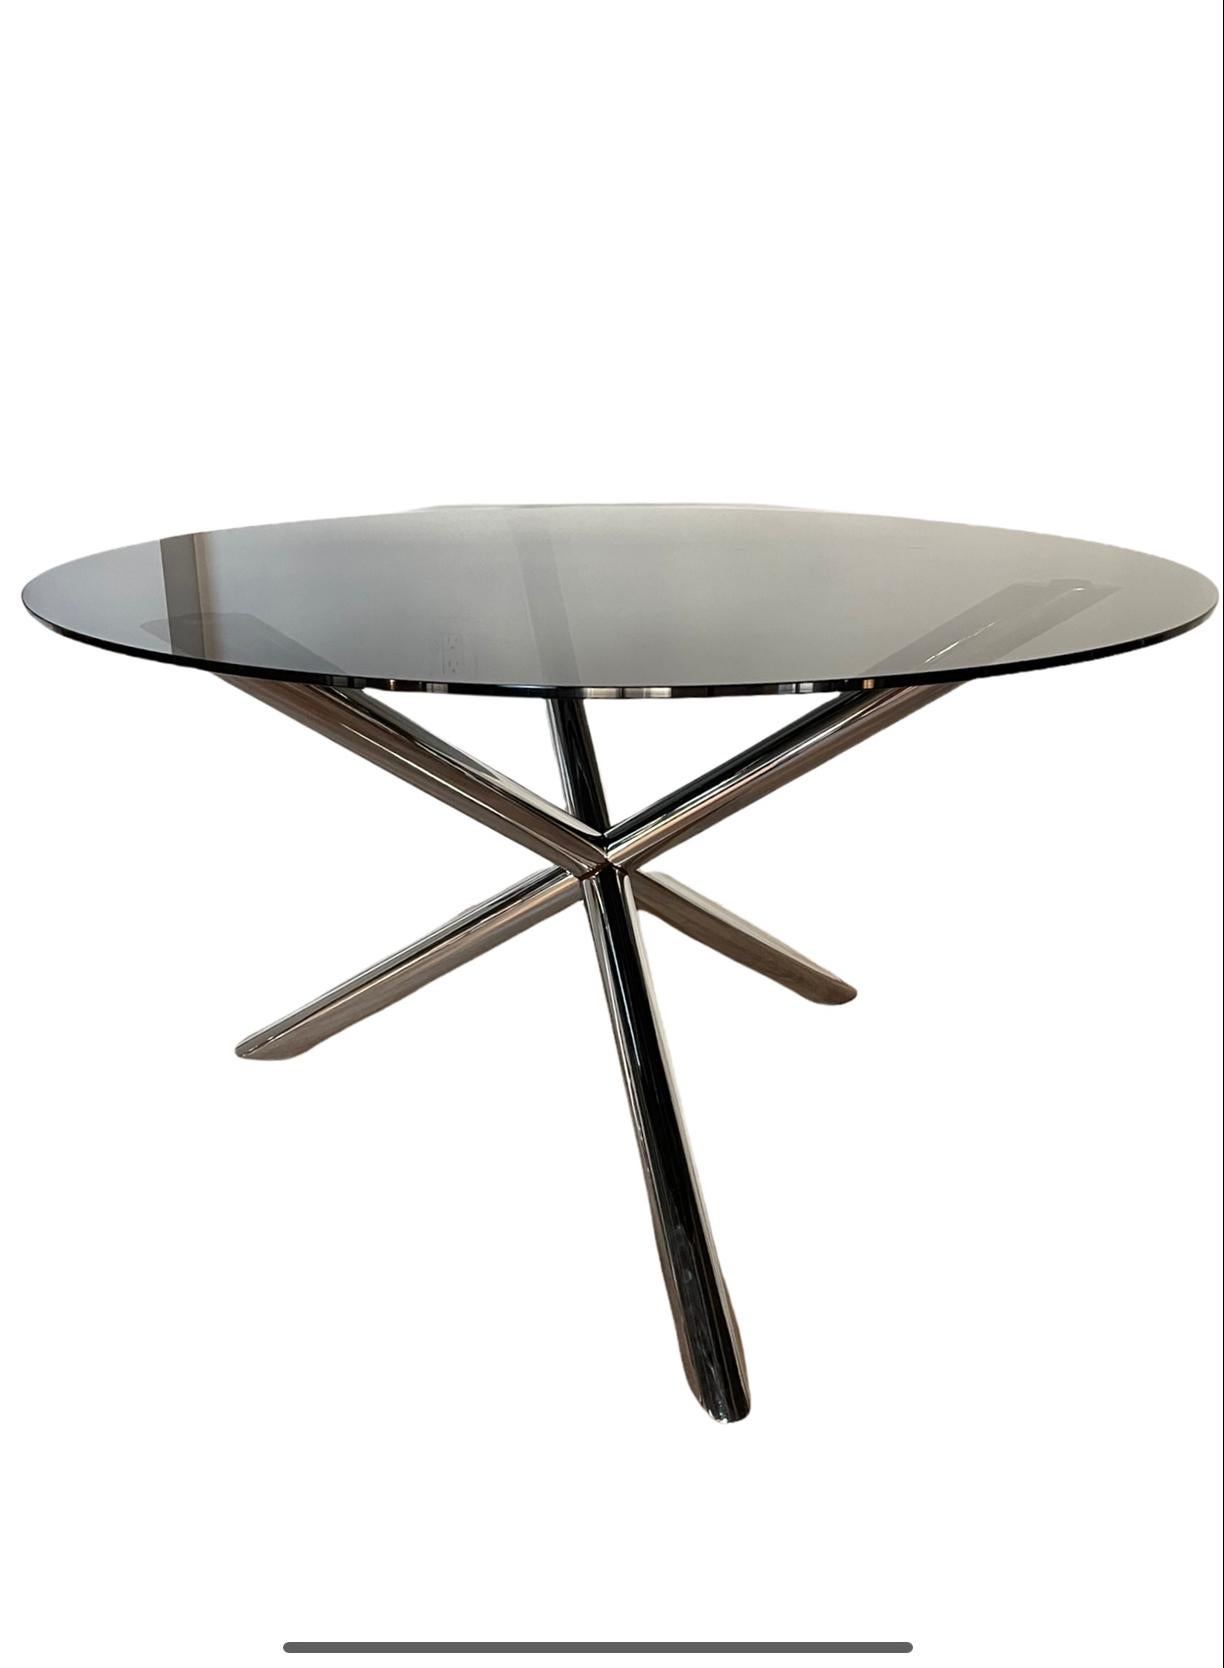 Italian Round Glass and Chromed Steel Dining Table, 1970s In Good Condition For Sale In Bastrop, TX